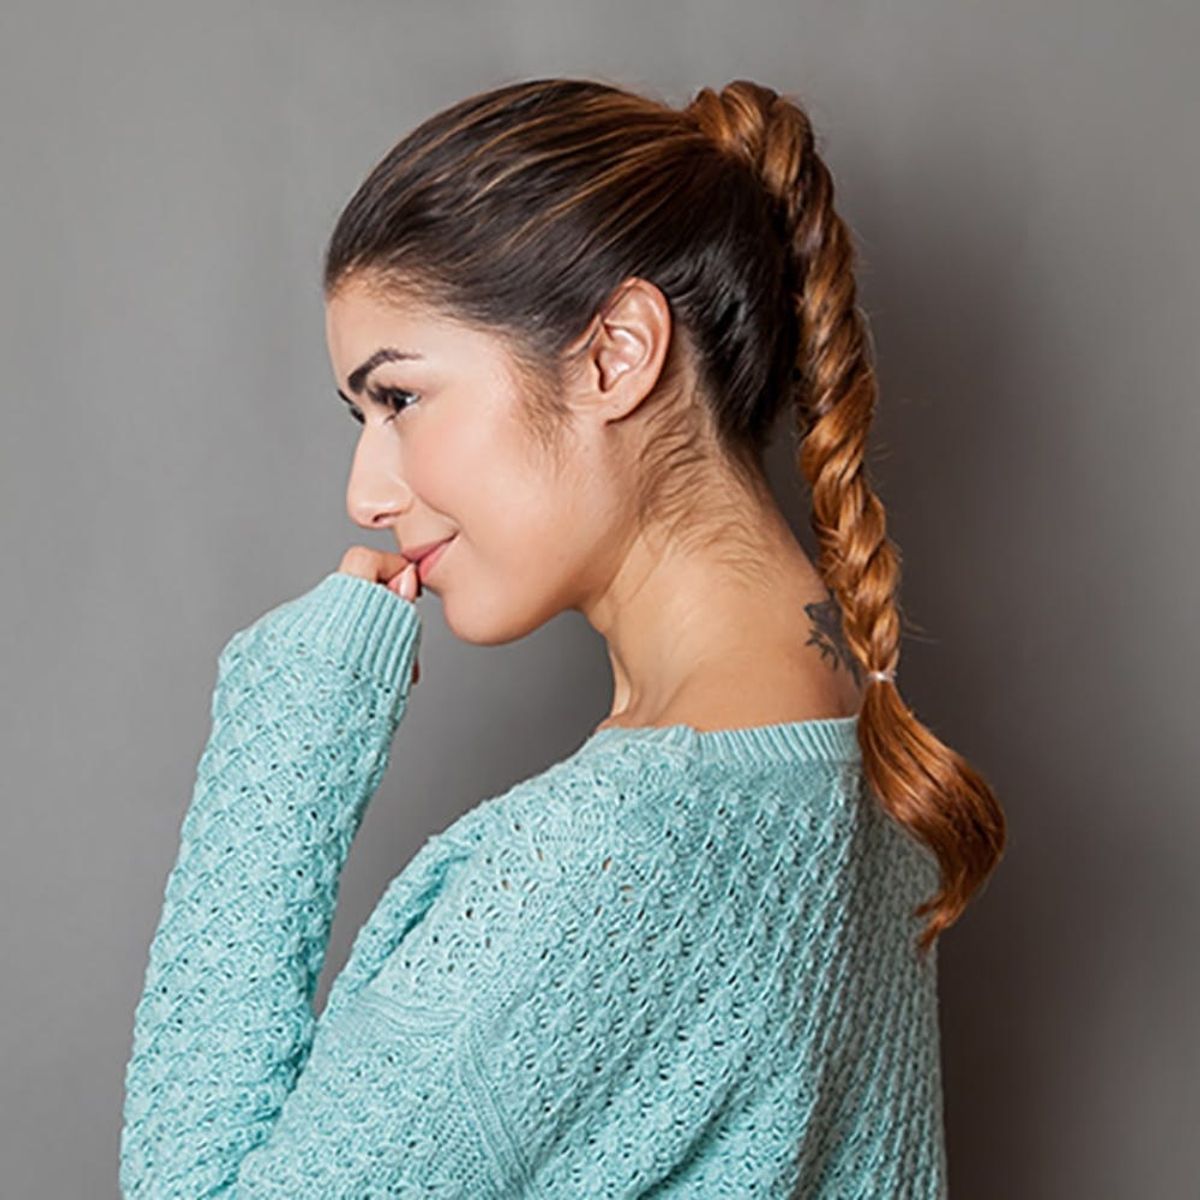 This Gigi Hadid-Inspired Braid Is Totally Doable + Insanely Chic